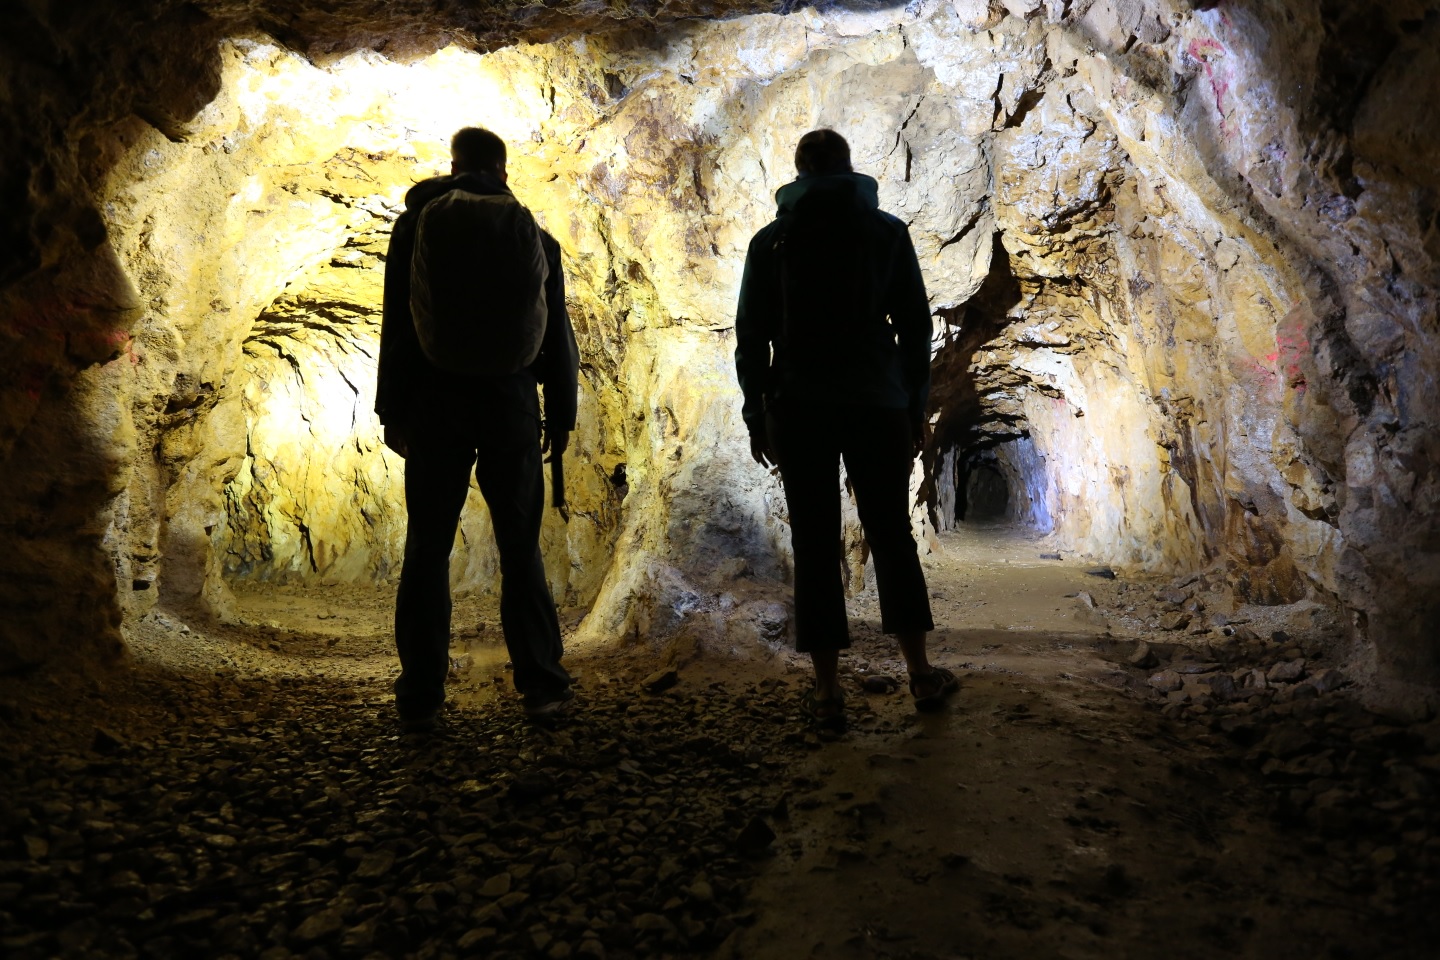 Caving in New Zealand